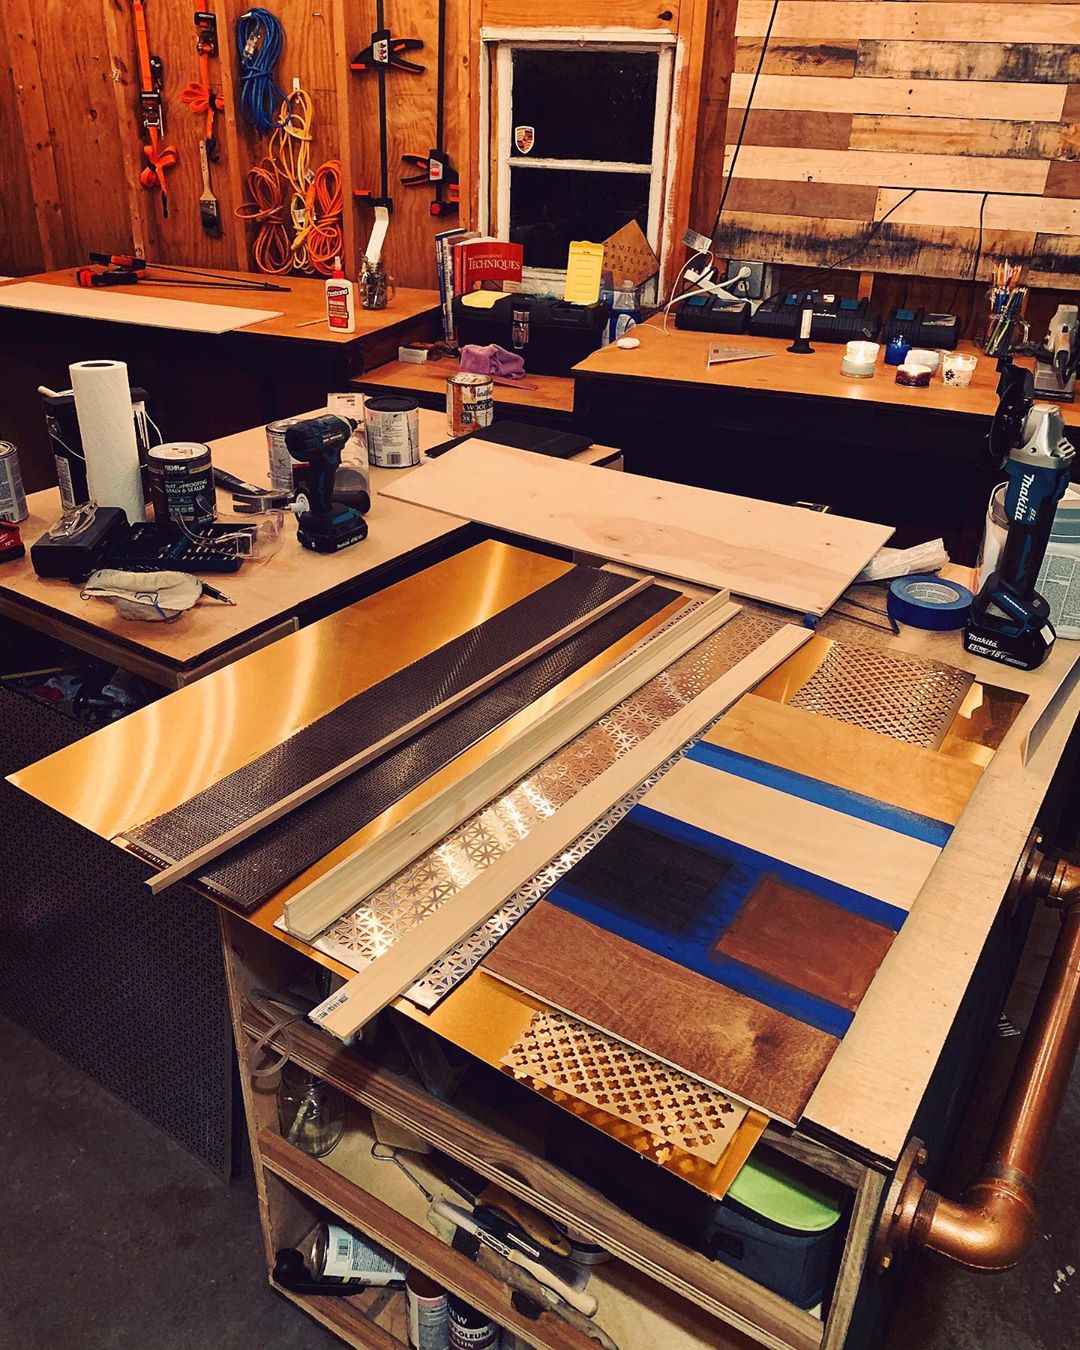 Wood Shop She Shed with Work Table Covered in Pieces of Wood. Photo by Instagram user @roirenovations